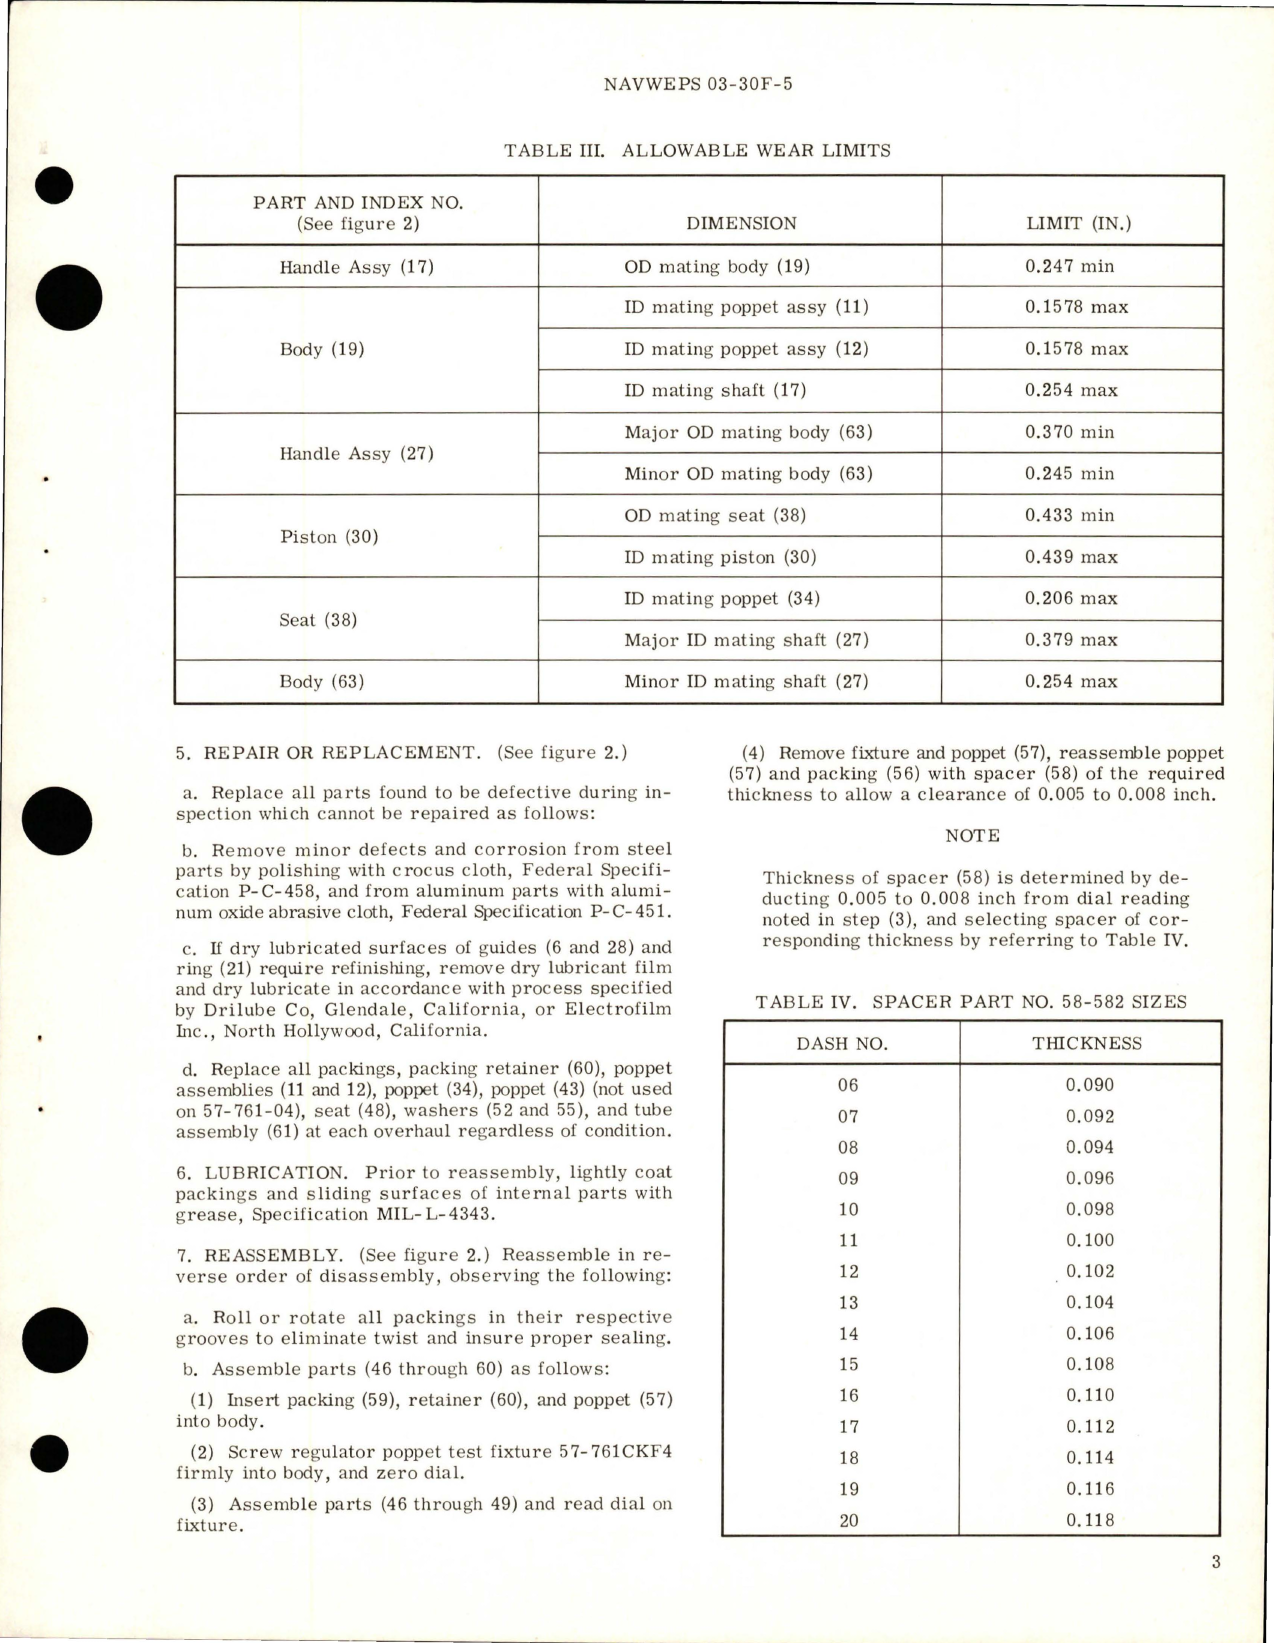 Sample page 5 from AirCorps Library document: Overhaul with Parts for Pneumatic Shutoff & Relief Regulating Valves - Parts 57-761, 57-761-01, 57-761-02, and 57-761-04